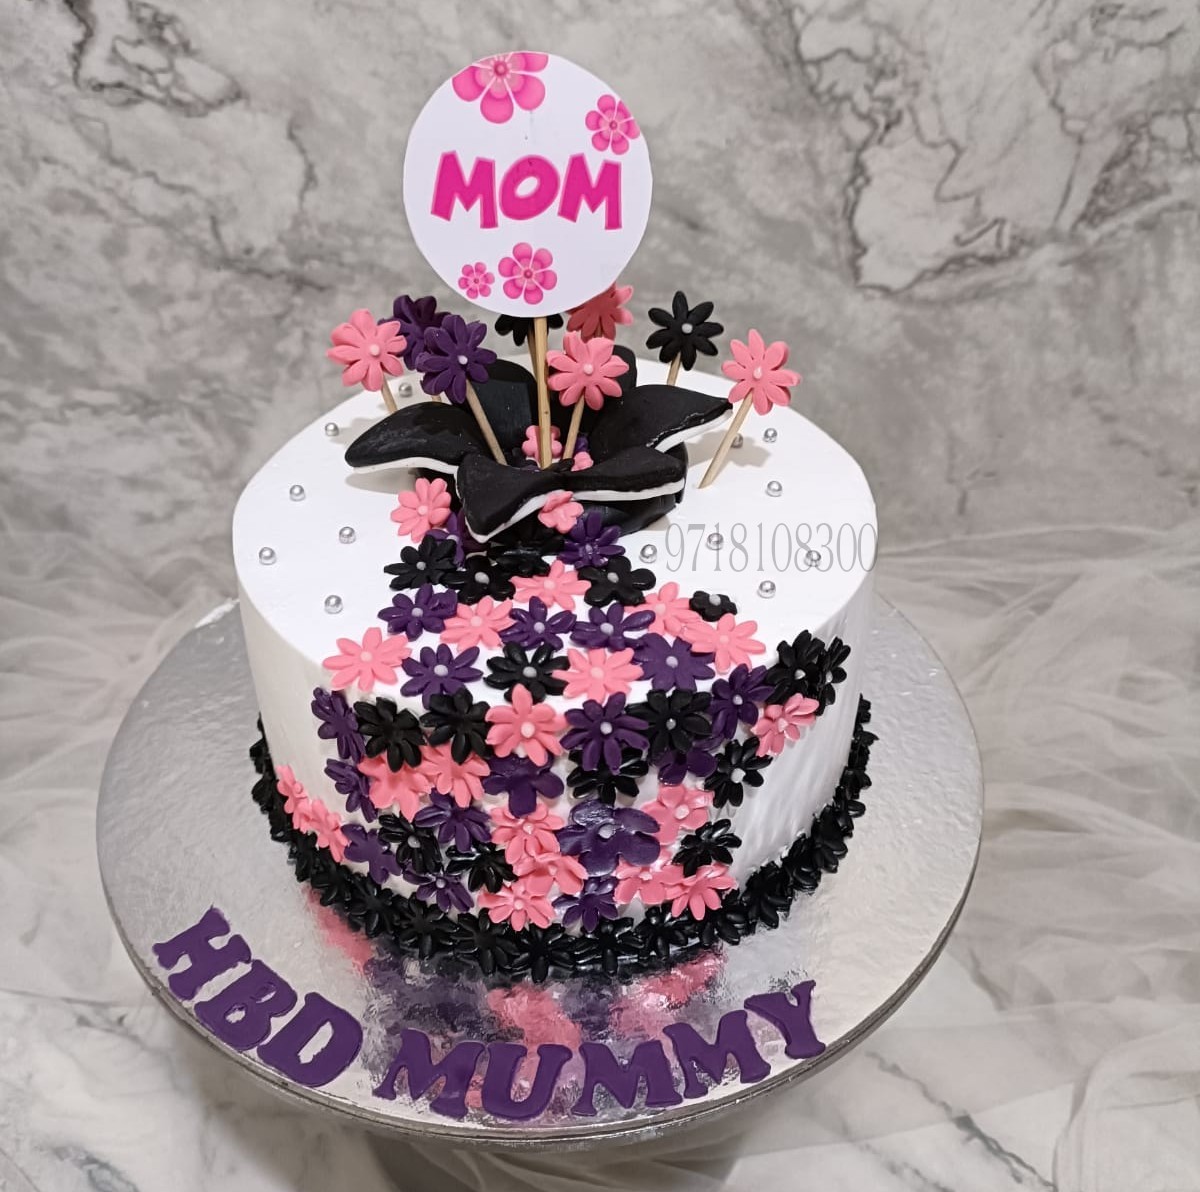 Order or Send Birthday Cake For Mother @ Rs.399 | Winni